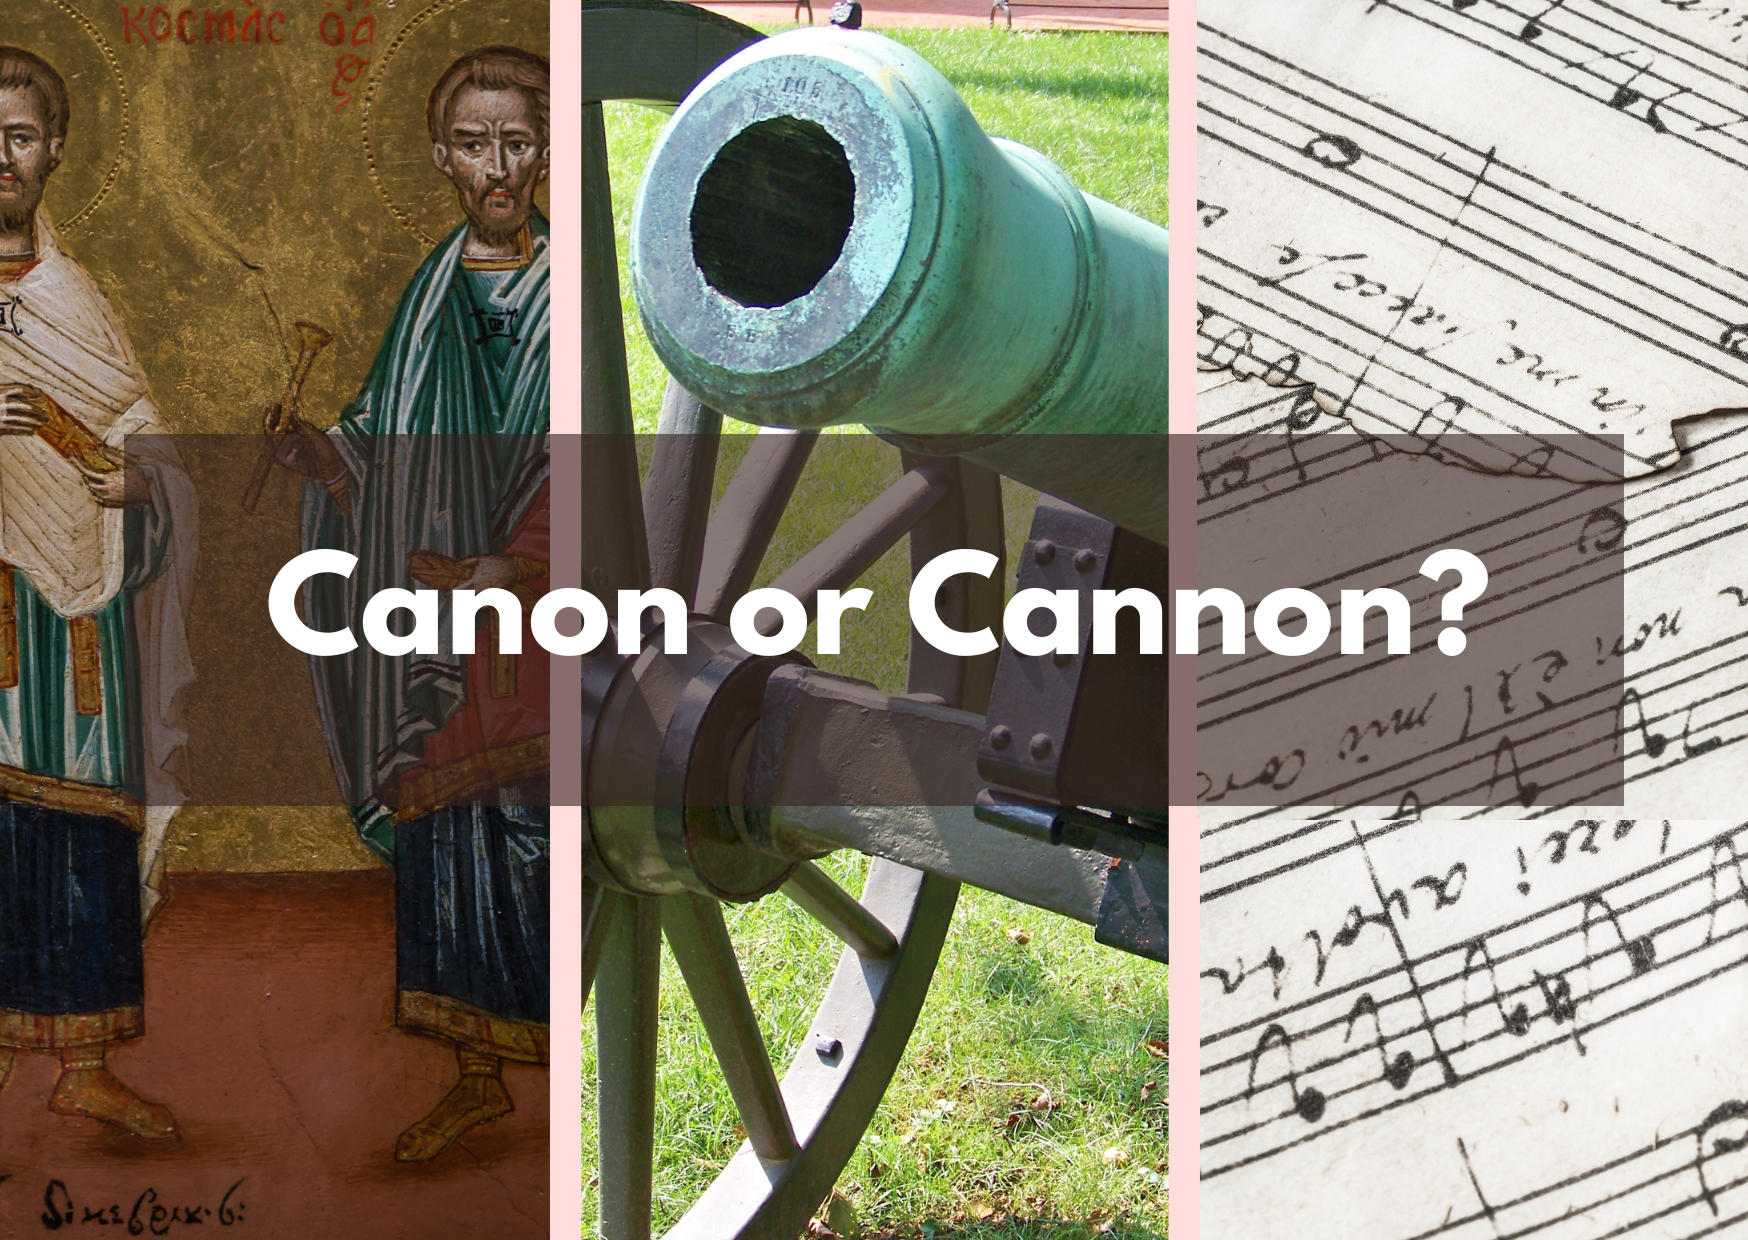 A graphic of three pictures side by side: a saint, and old cannon and a piece of classical music parchment, with the caption "Cannon or canon?